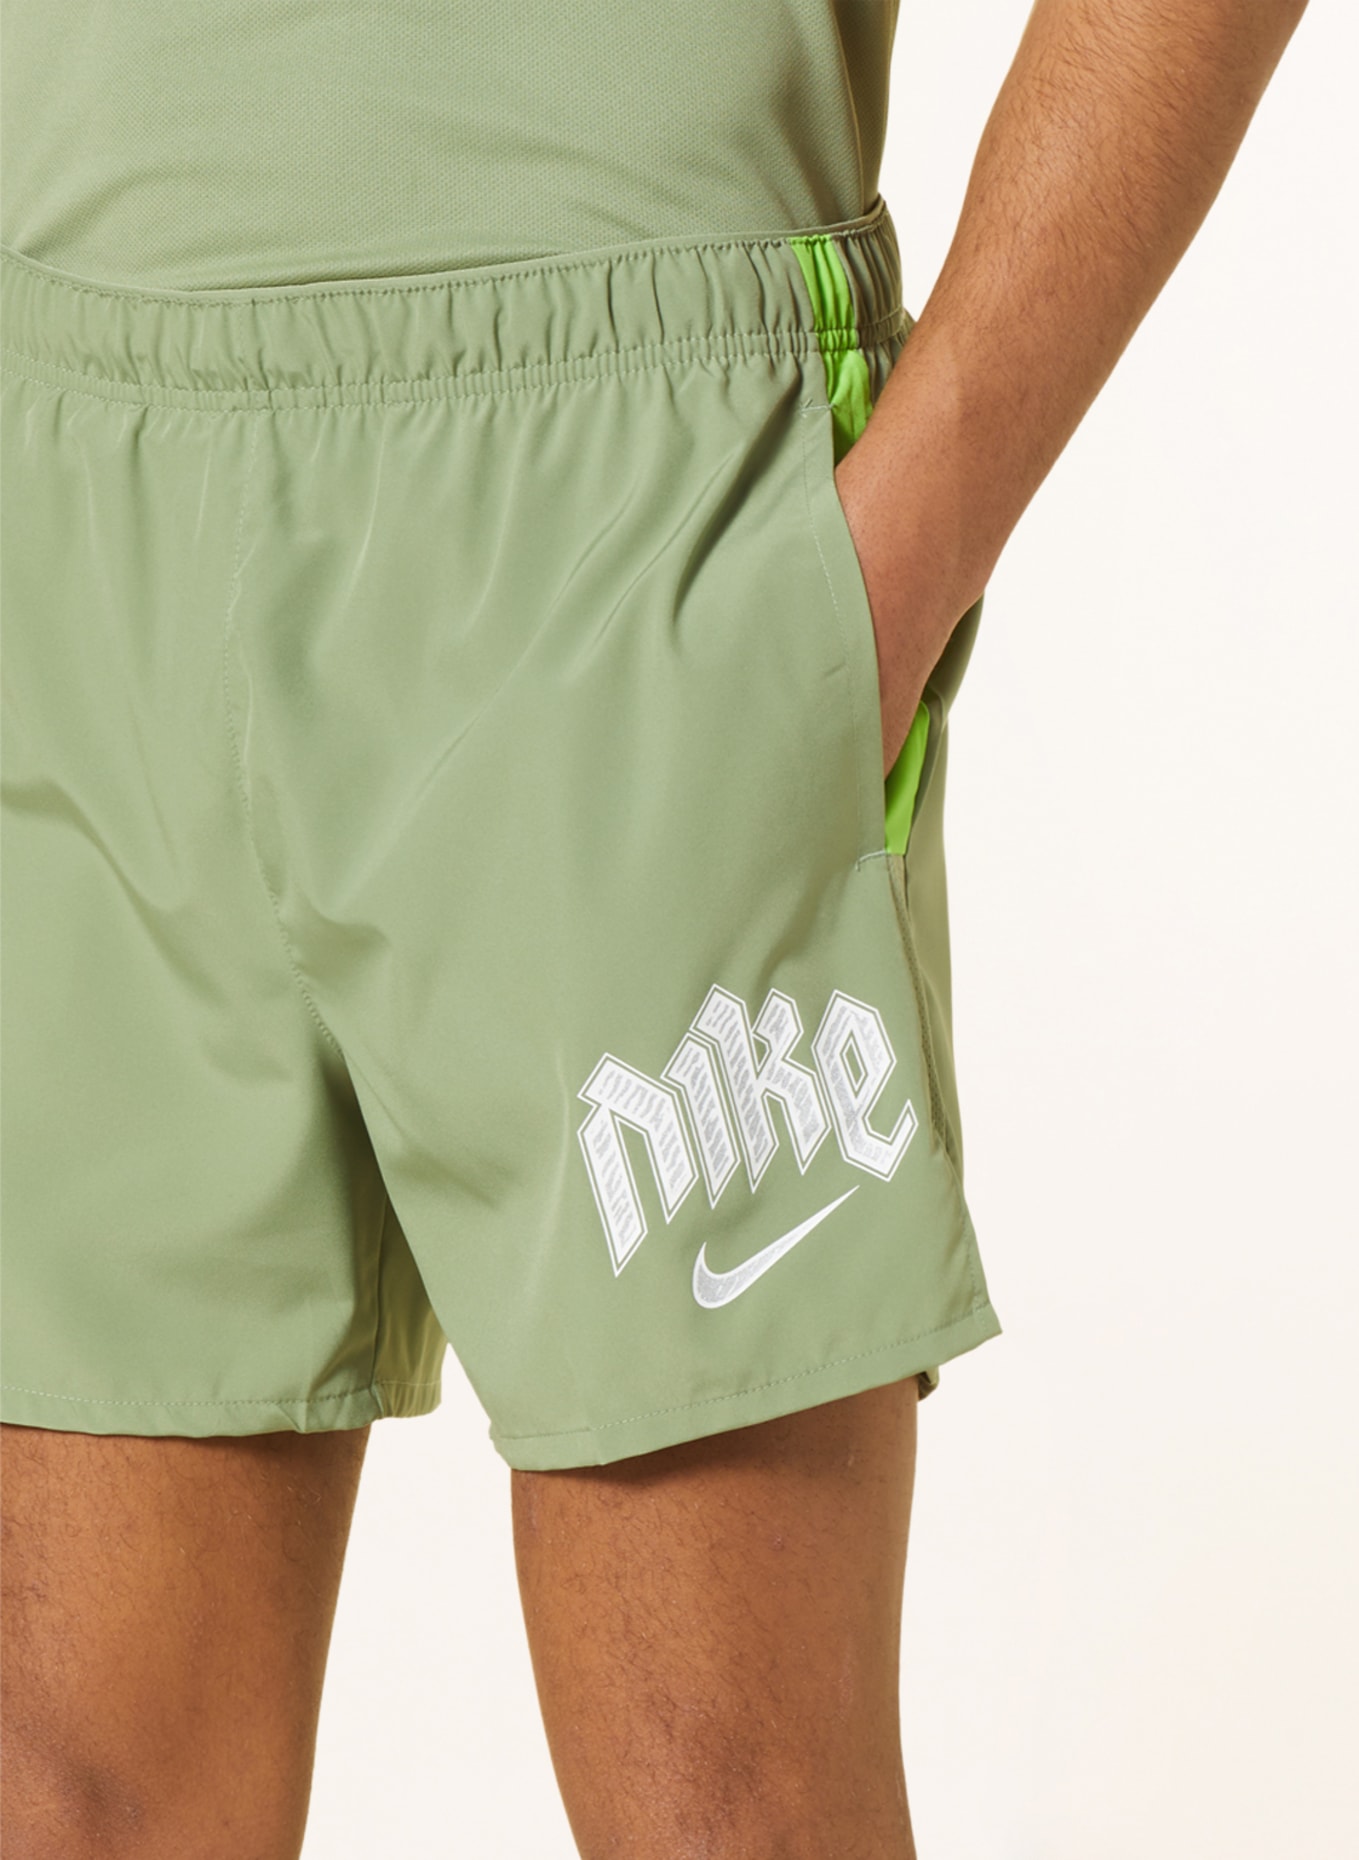 Nike 2-in-1 running shorts DRI-FIT RUN DIVISION CHALLENGE with mesh, Color: OLIVE/ NEON GREEN/ SILVER (Image 5)